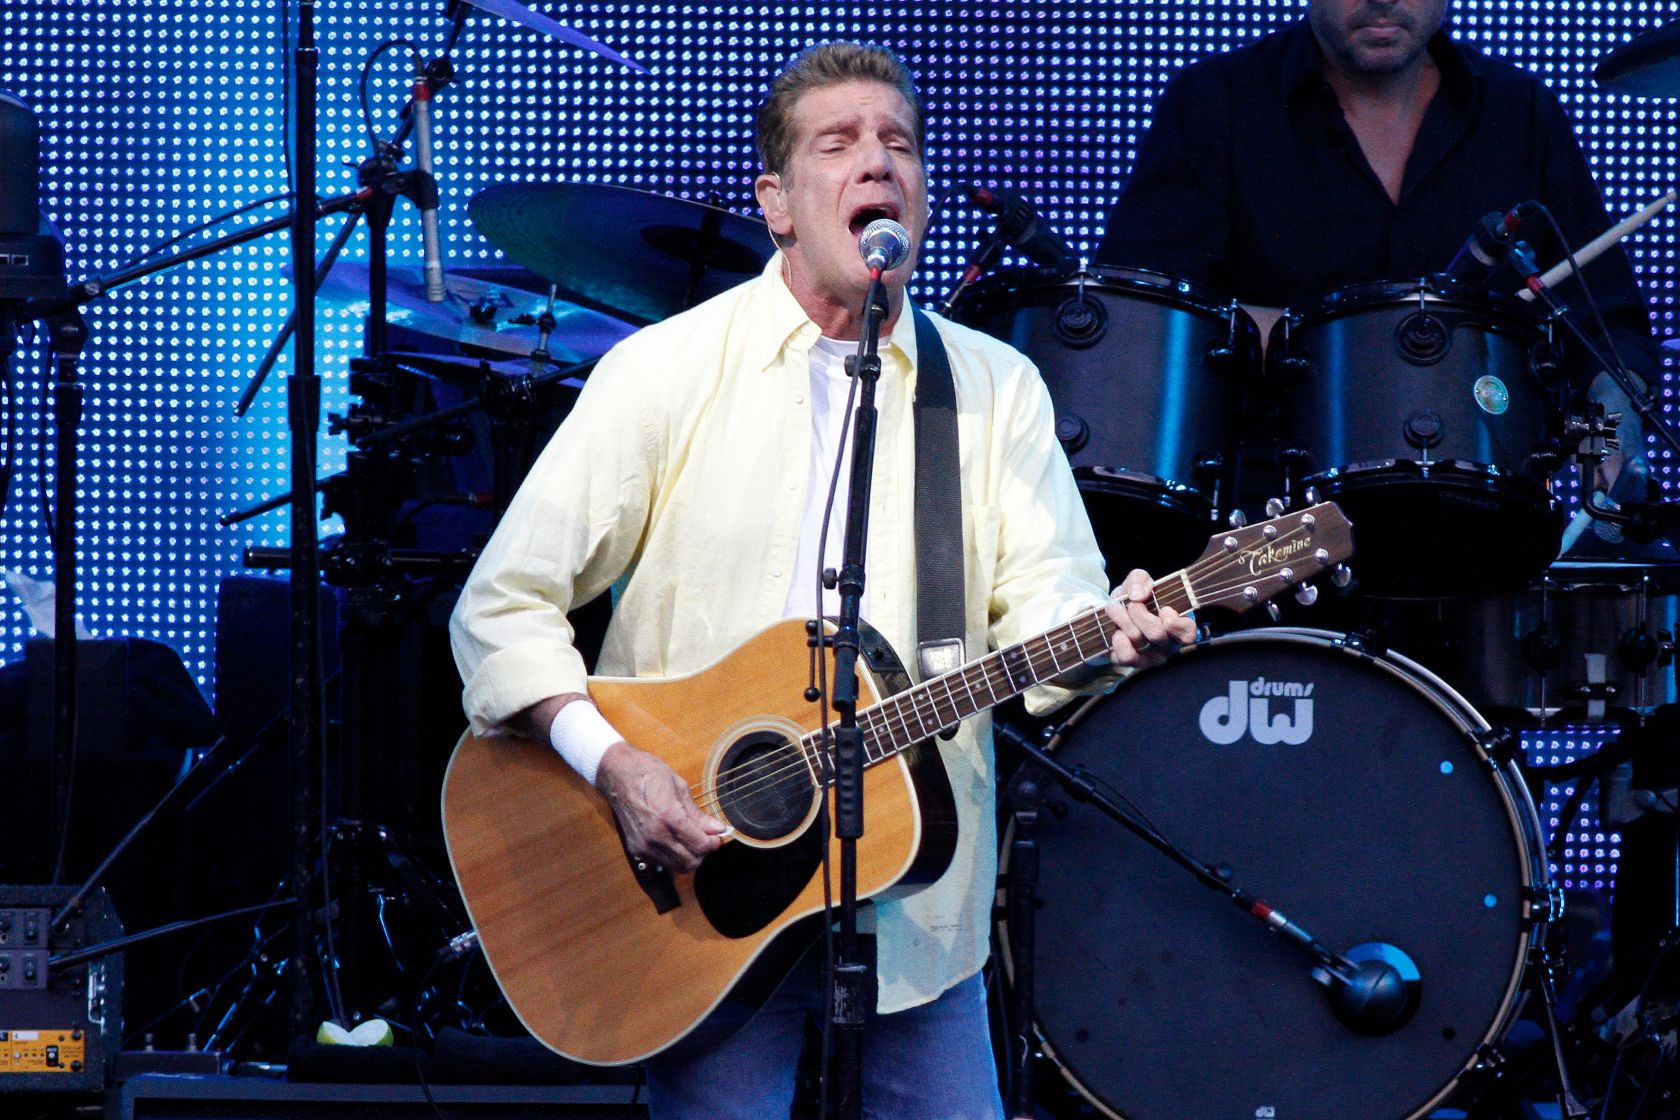 Eagles - Band, rock music, USA - Singer and Guitarist Glenn Frey performing in Berlin, Germany, Waldbuehne